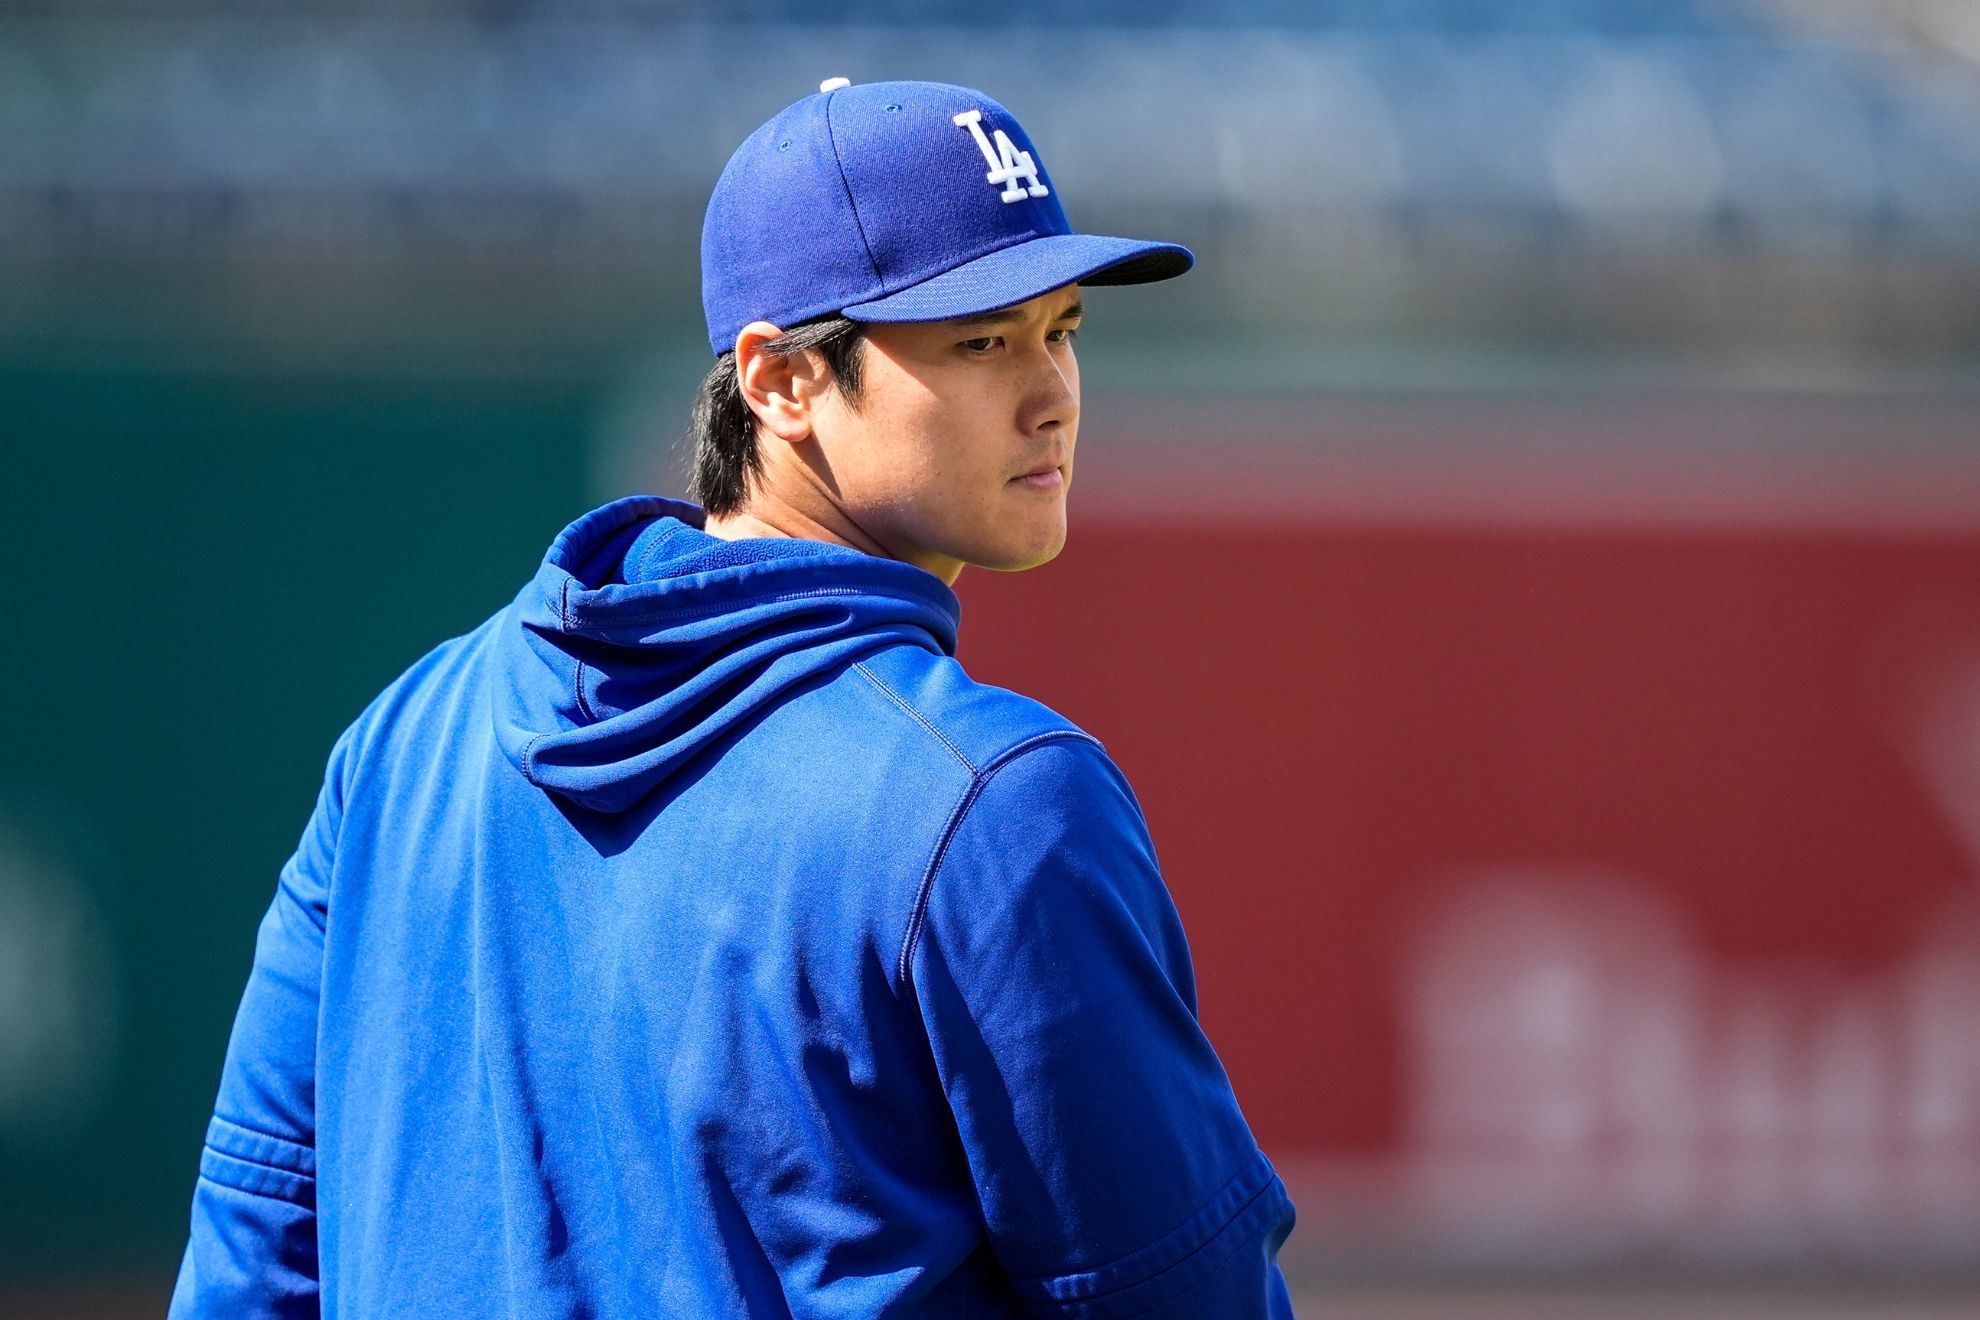 Dodgers manager Dave Roberts will have a talk with Shohei Ohtani about his performance